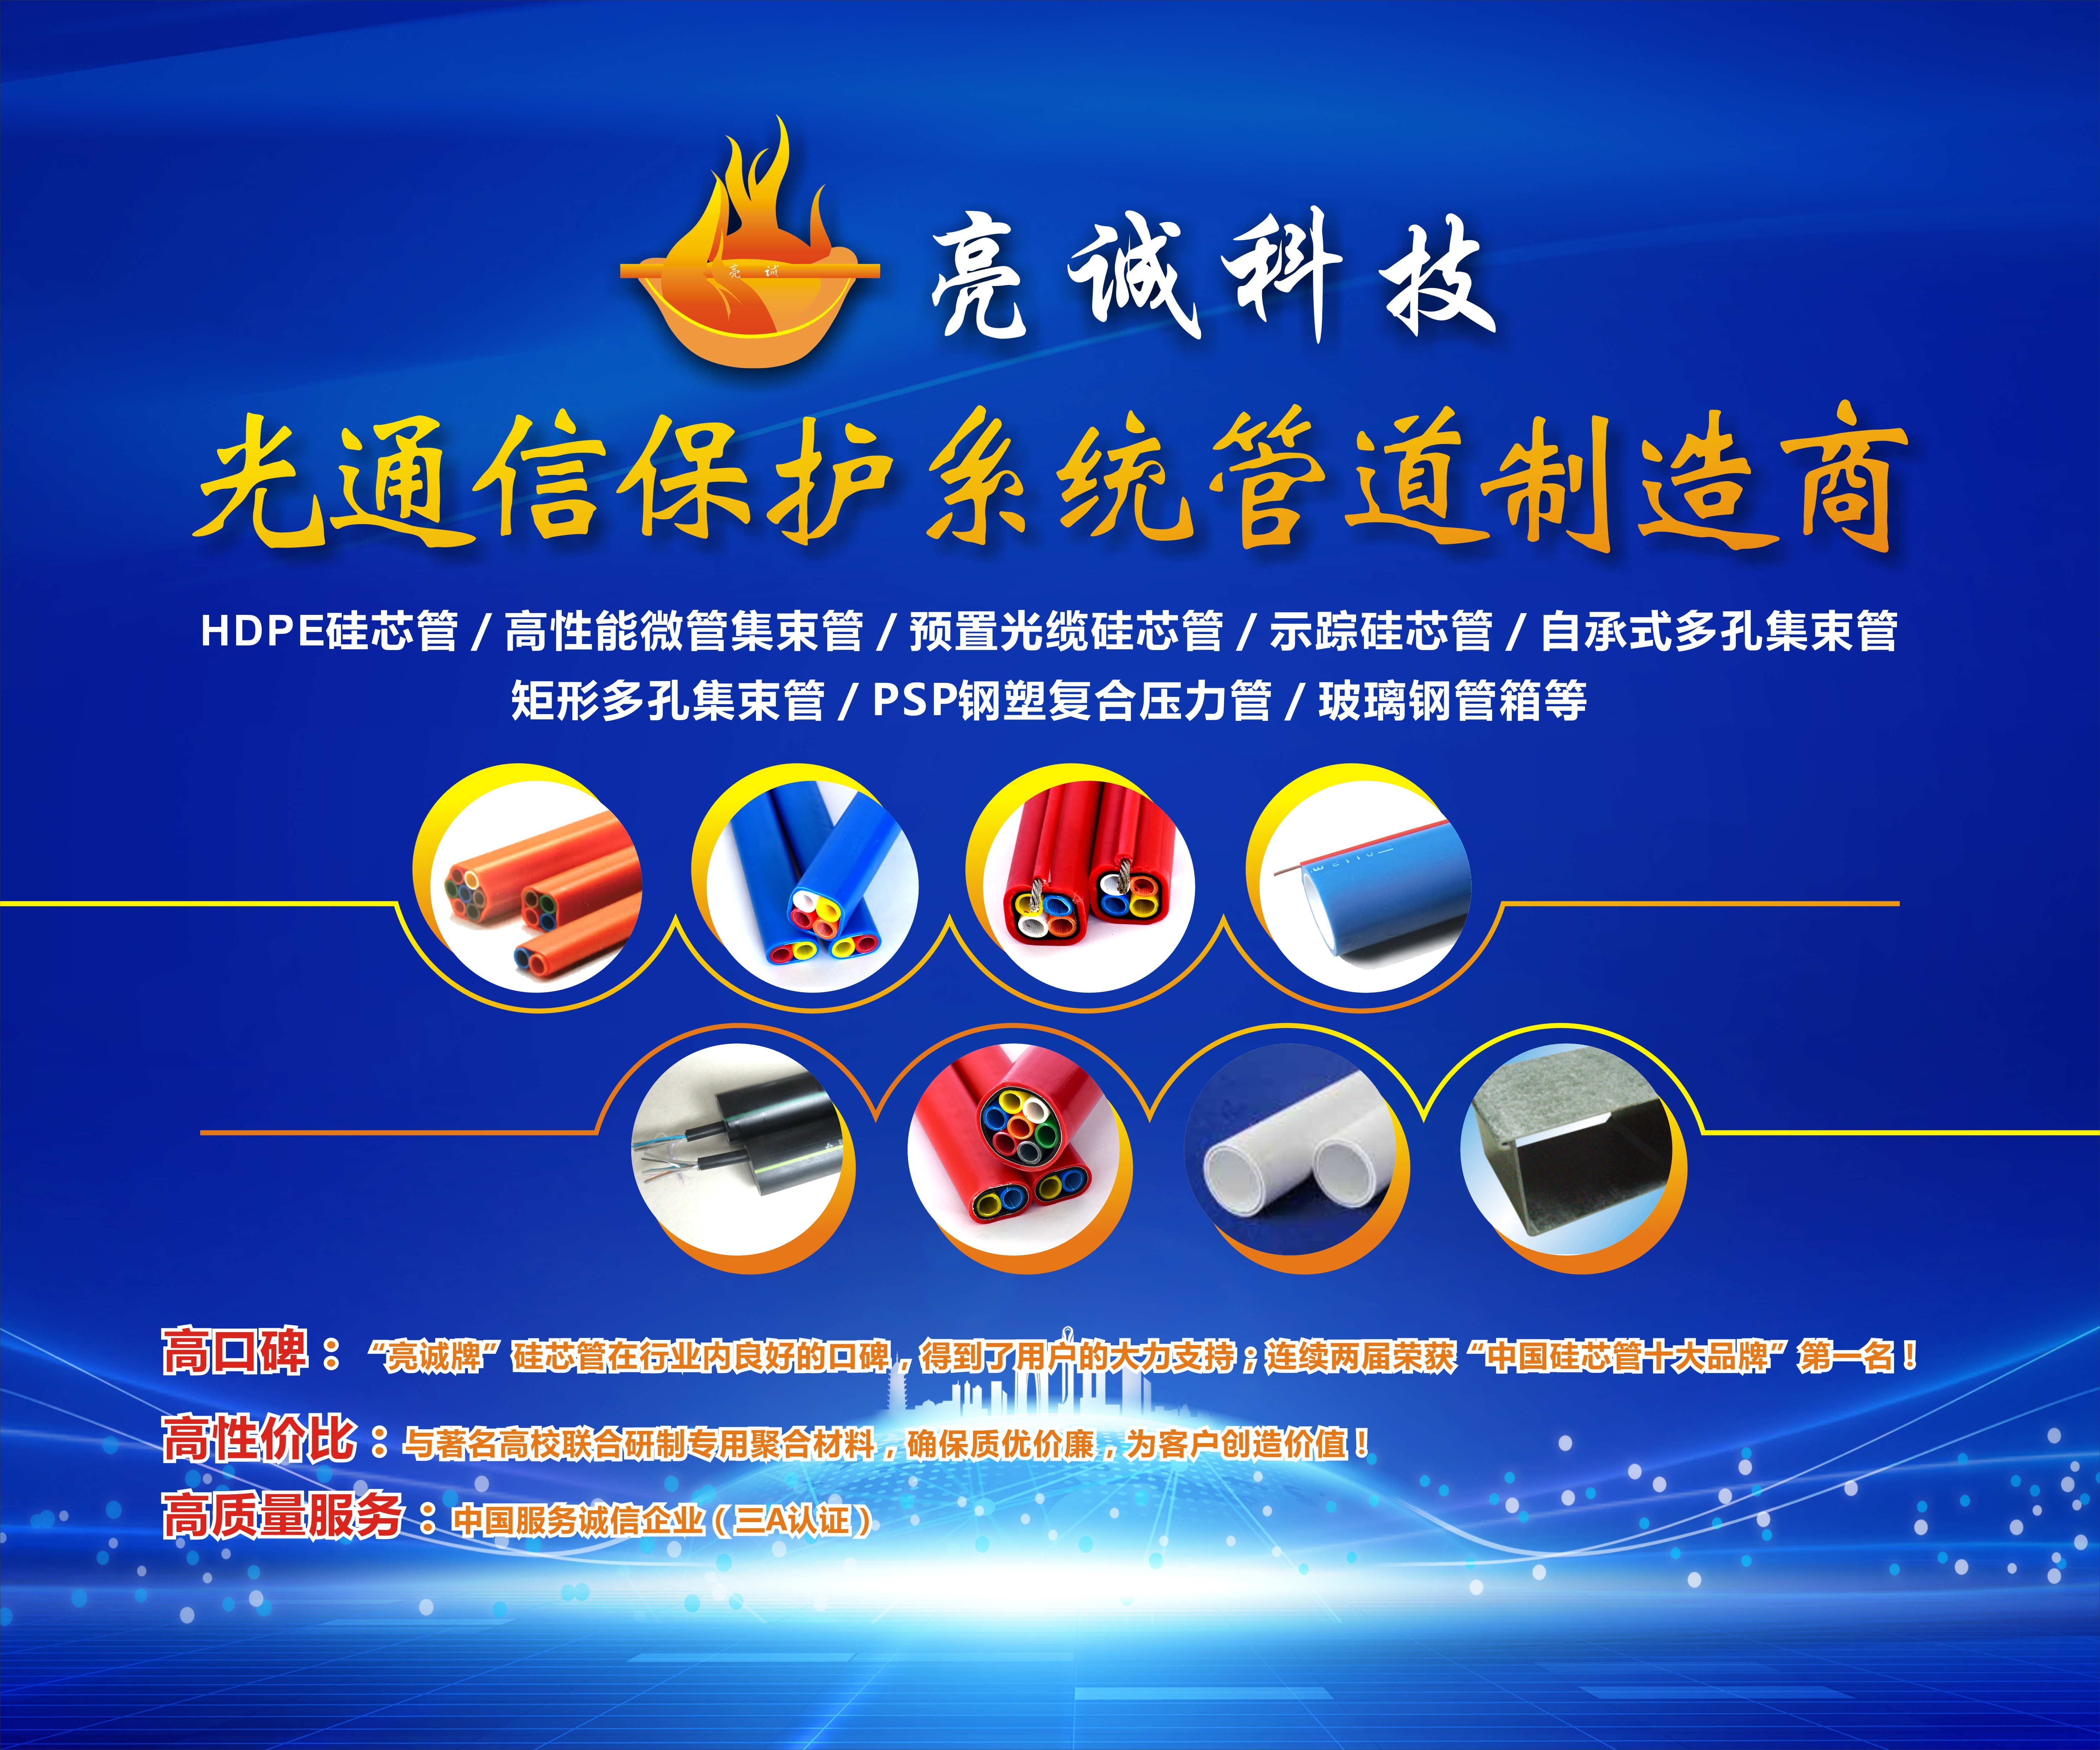 Liangcheng Technology was invited to participate in the 24th China Expressway Information Conference